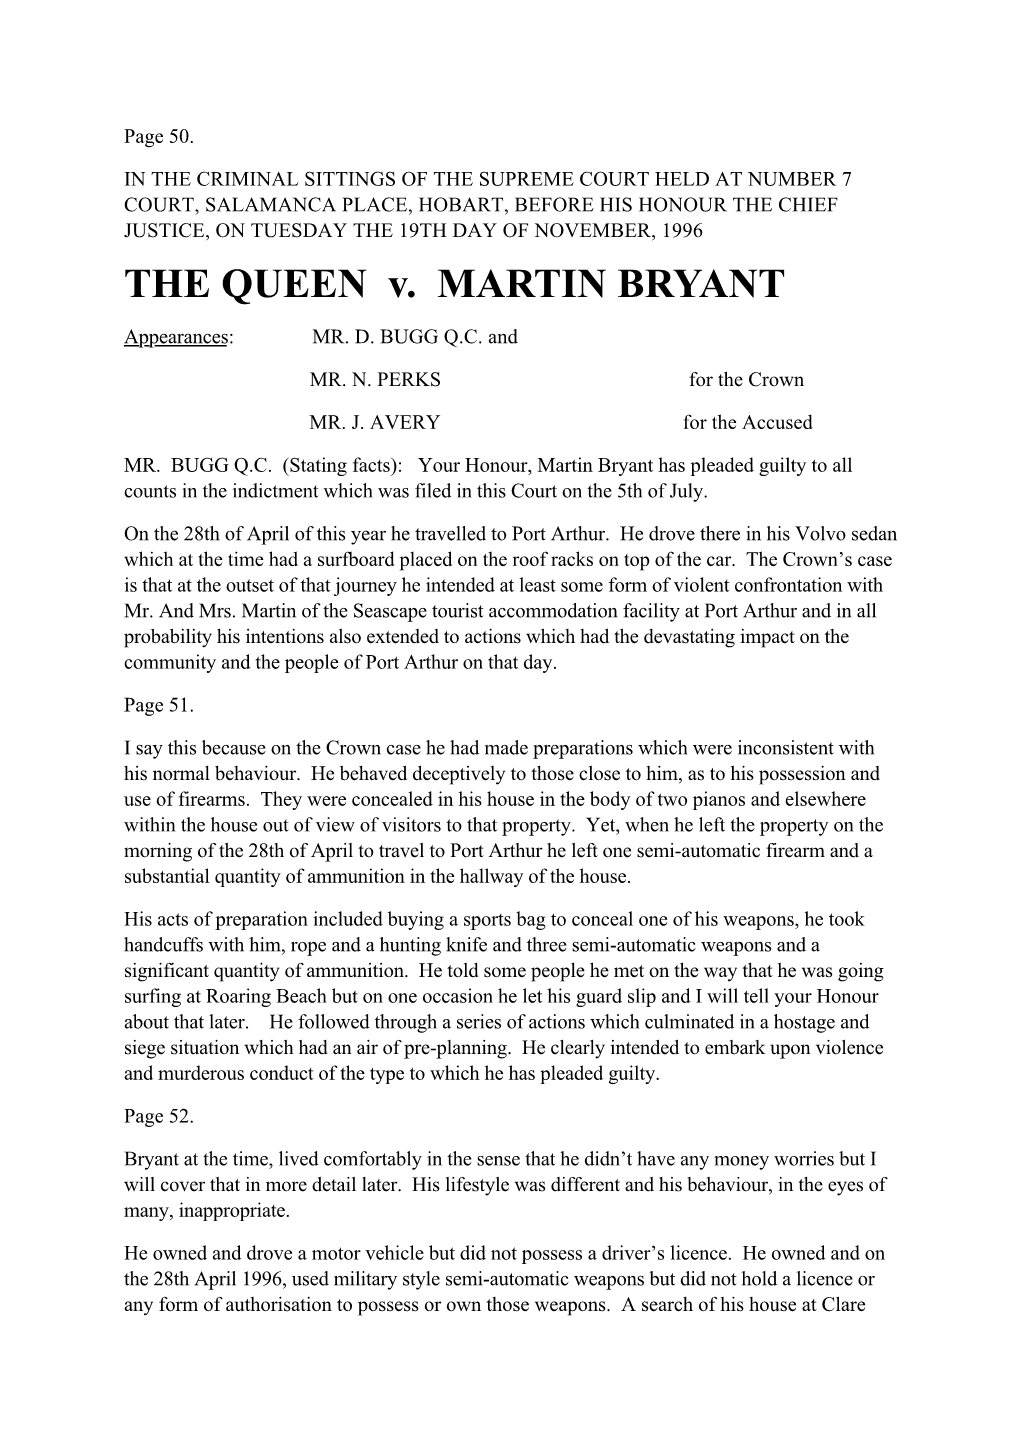 THE QUEEN V. MARTIN BRYANT